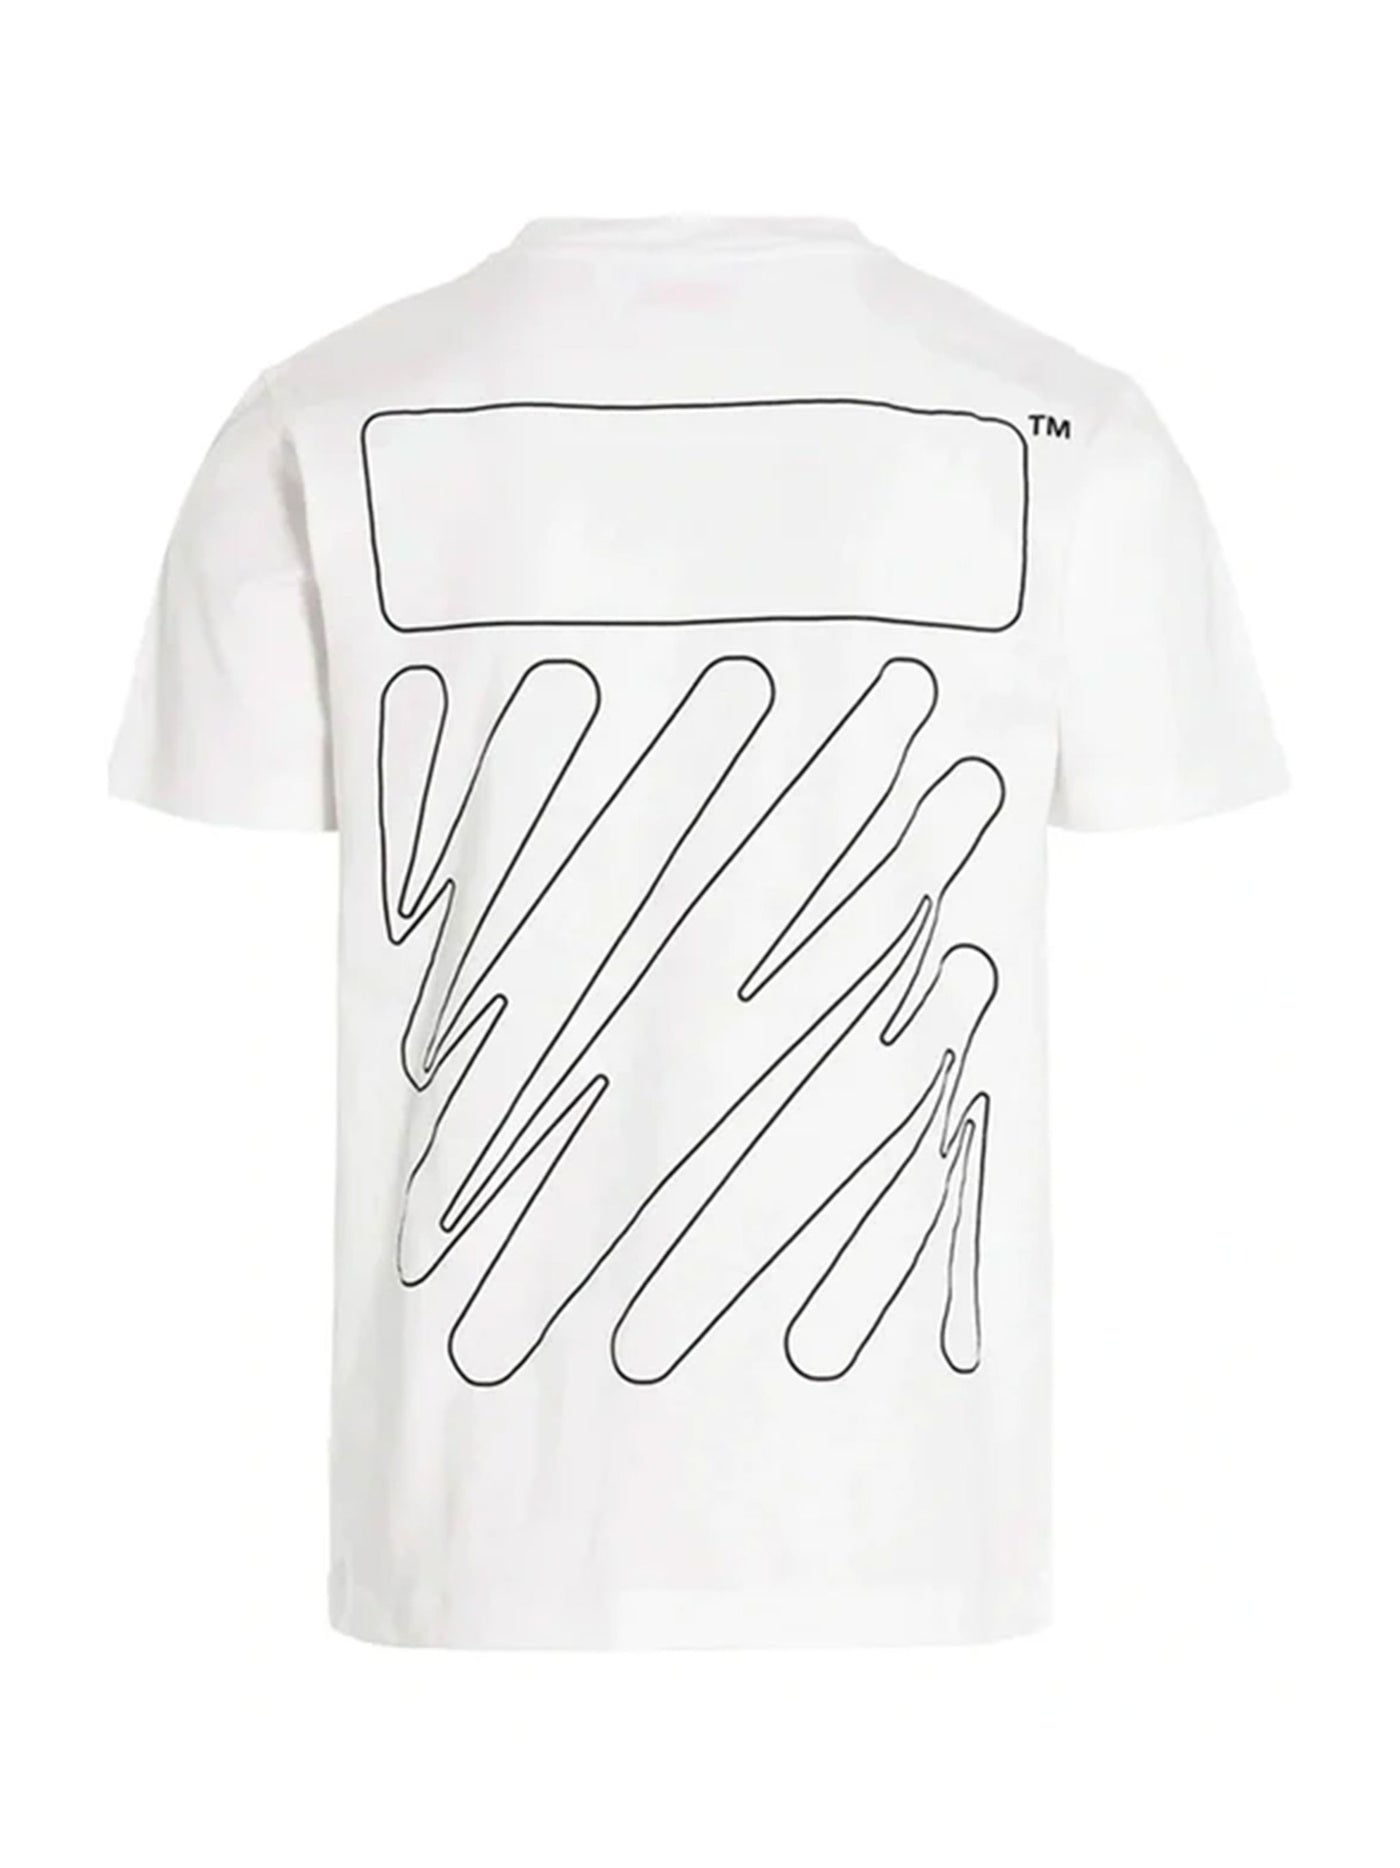 Off-White Wave Diagonal Printed Cotton T-Shirt in White